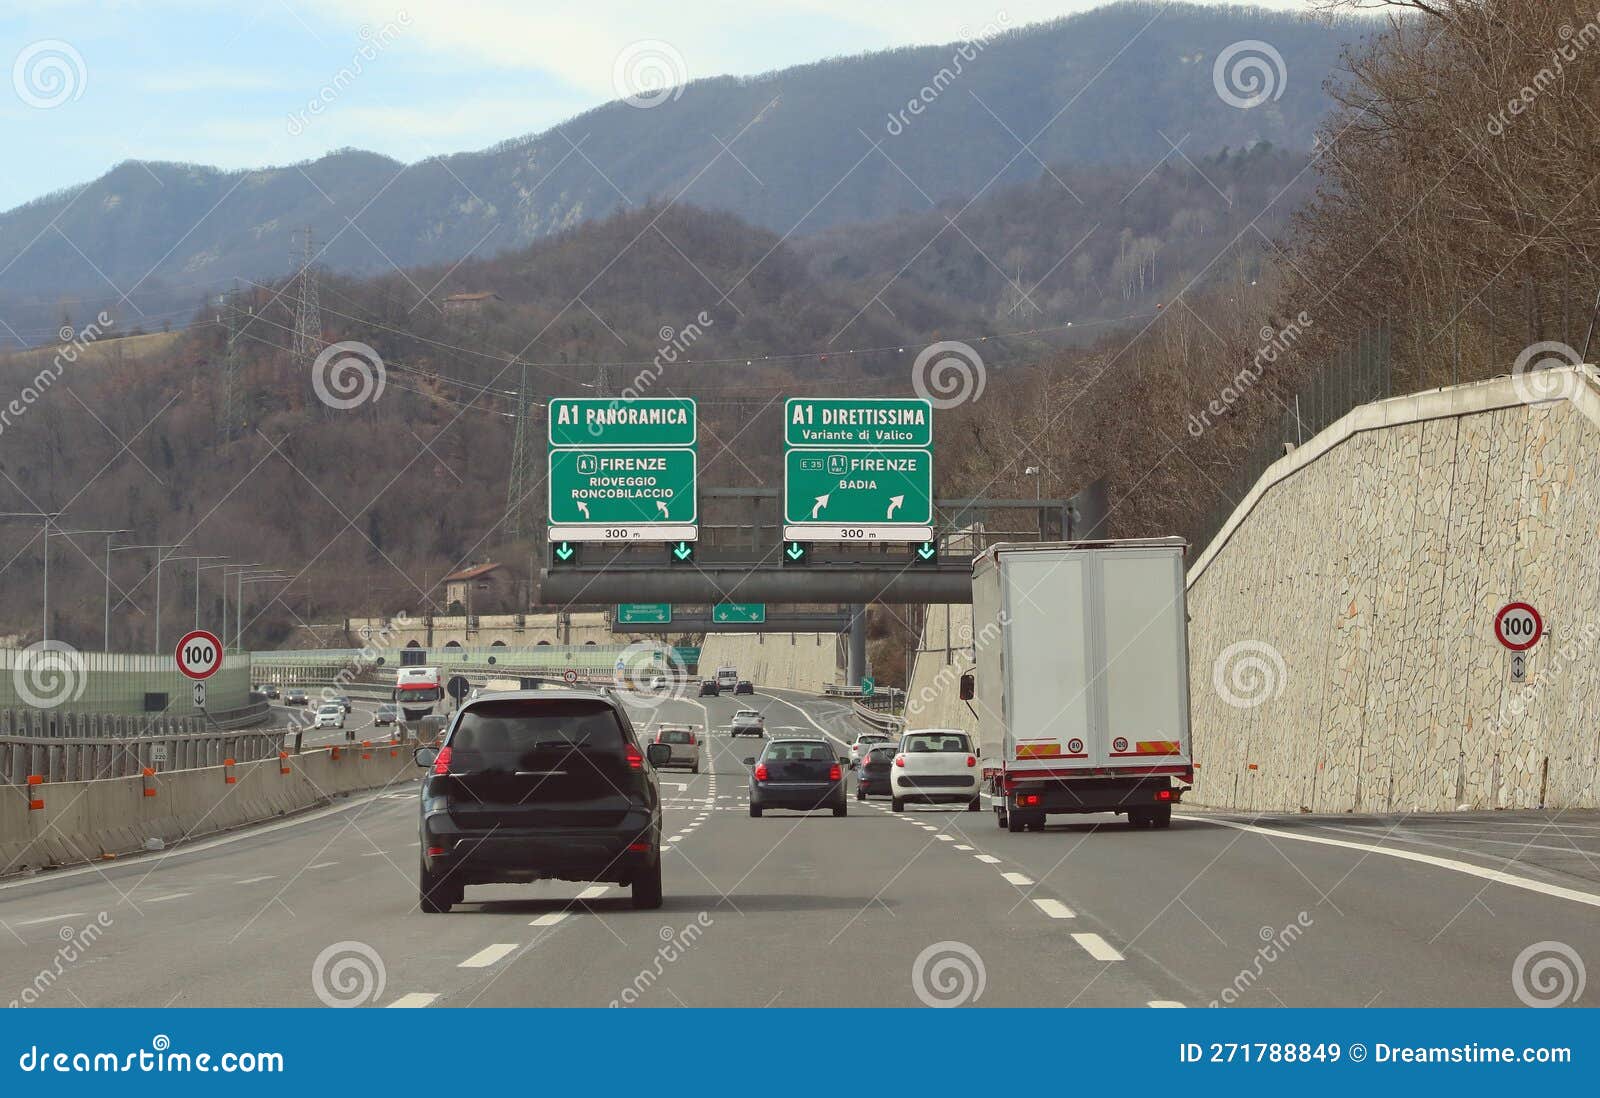 junction of the italy autostrada with localities near florence and motor vehicles